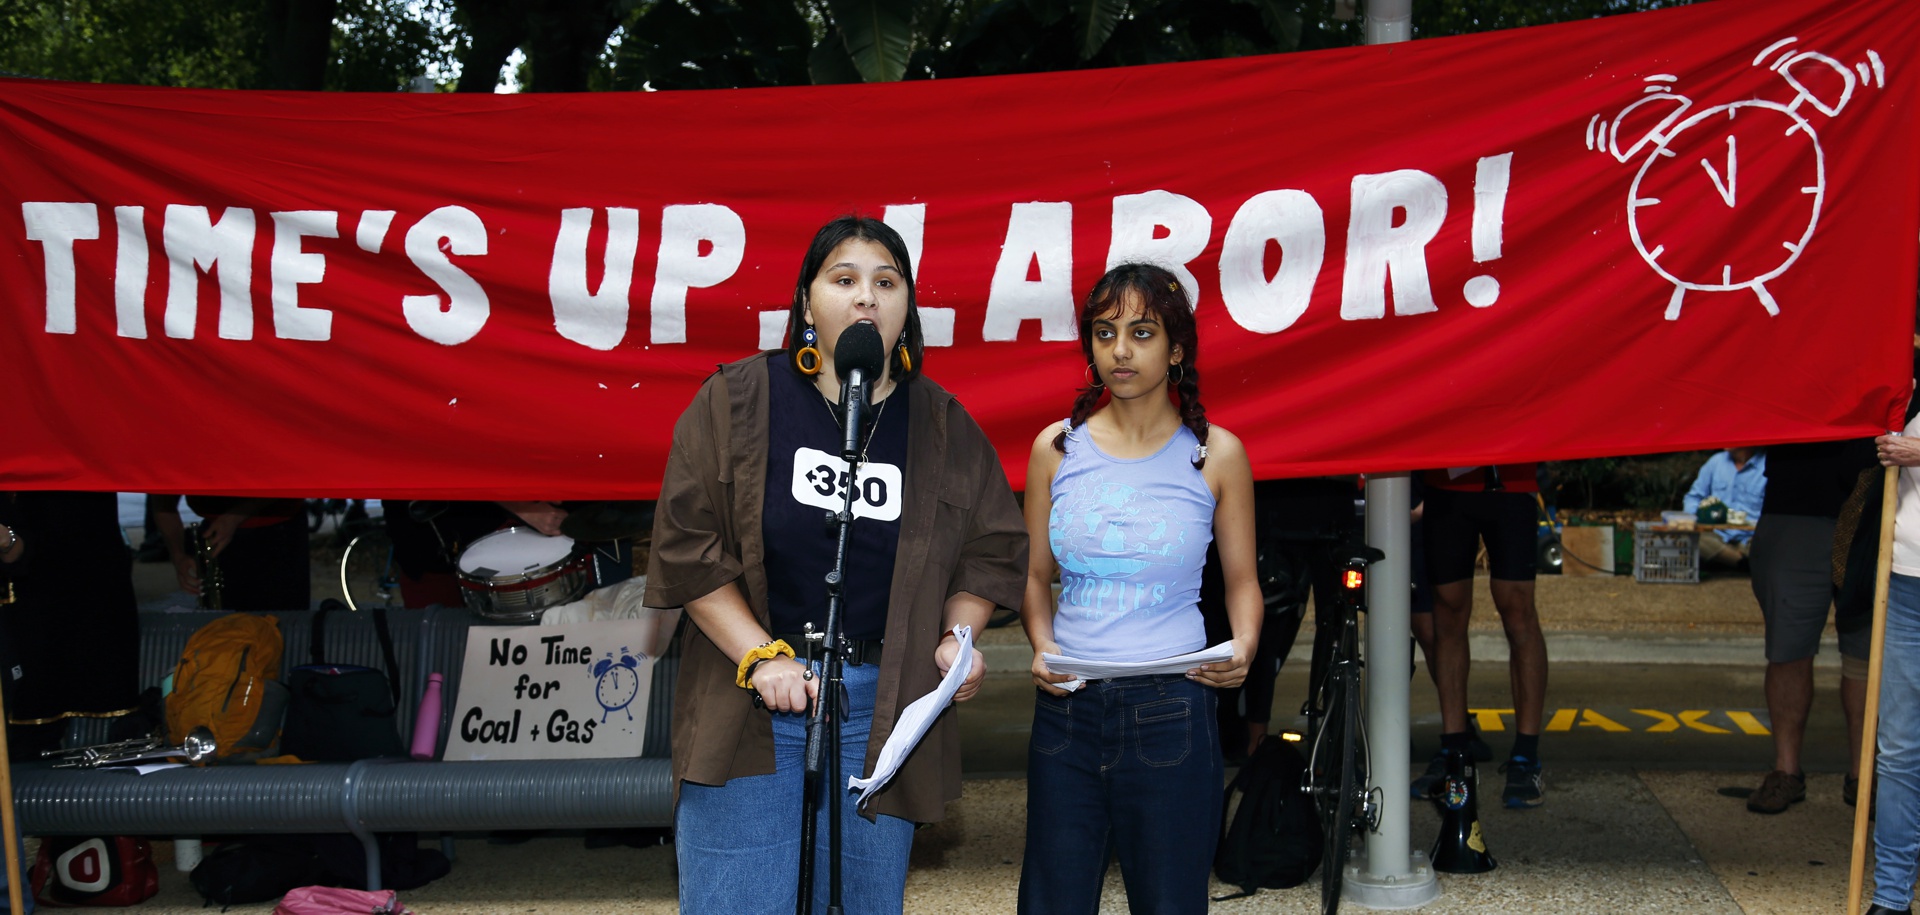 Rally MCs say: "Time's up Labor"